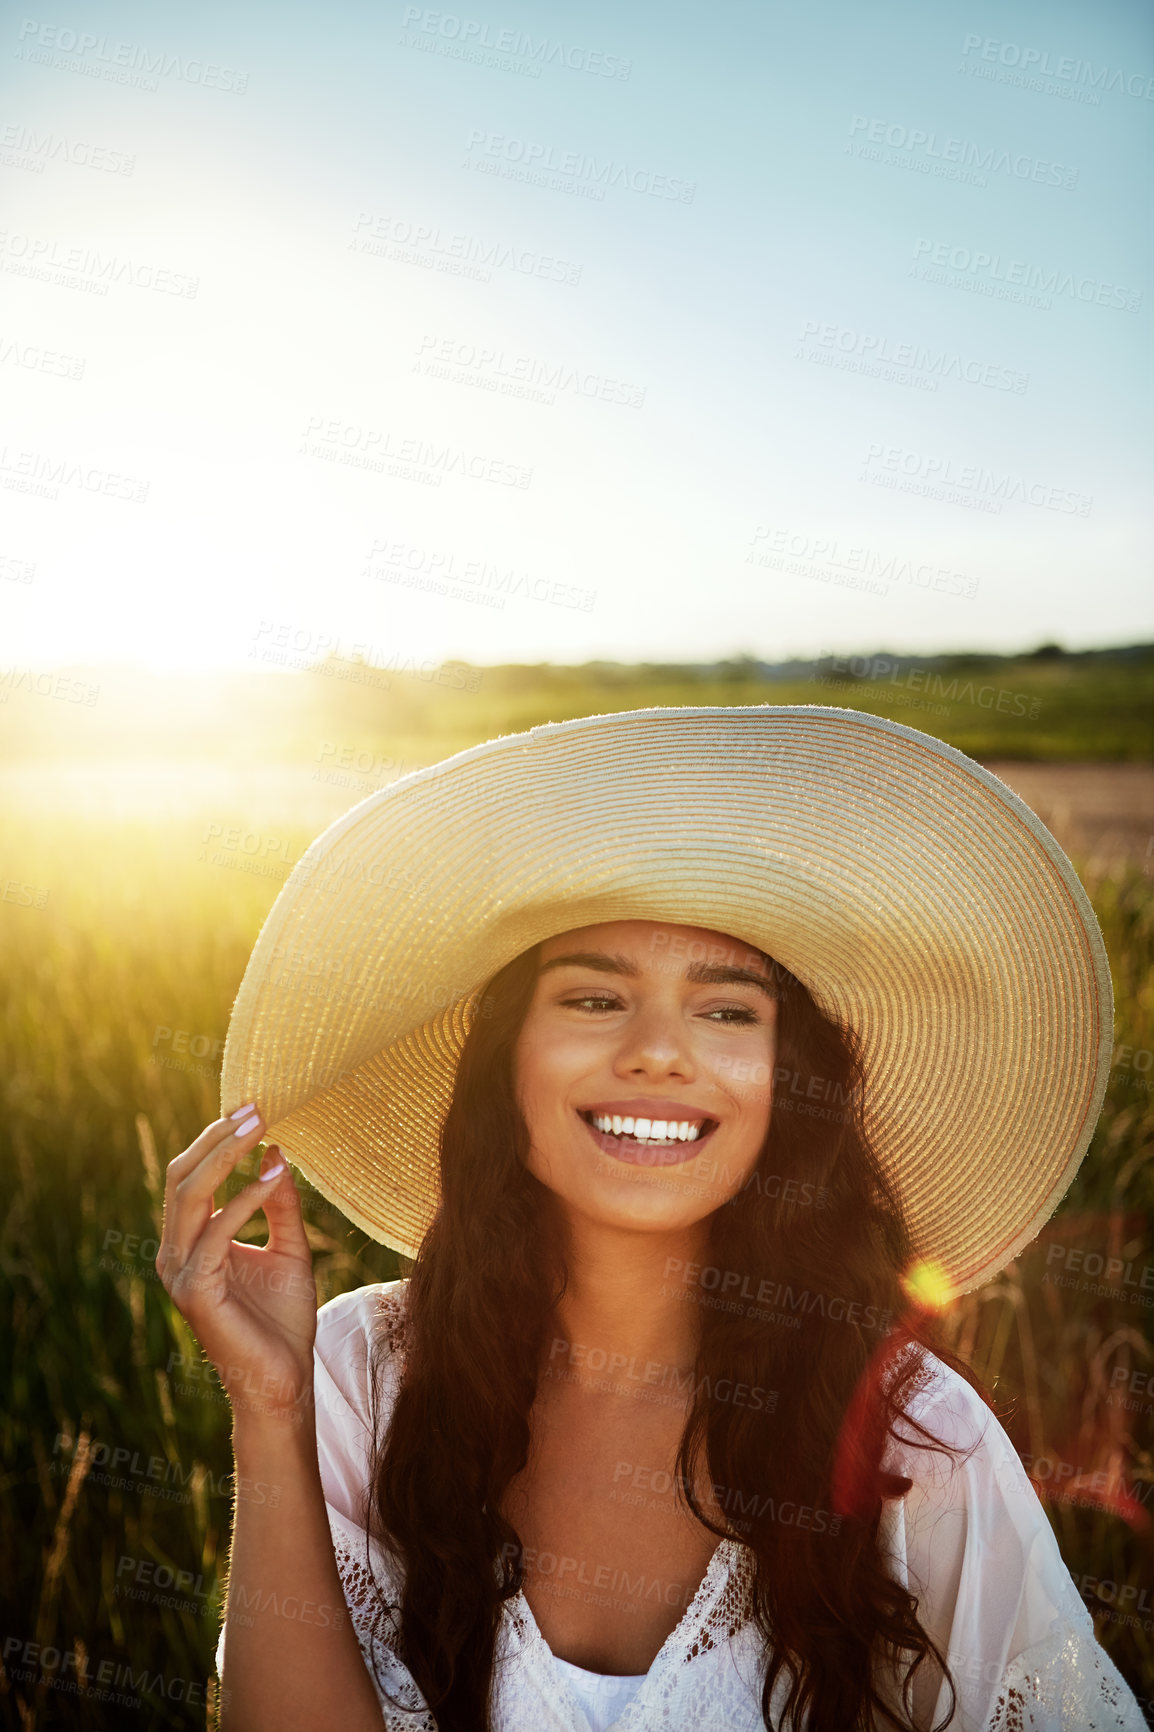 Buy stock photo Shot of an attractive young woman standing outside in a field